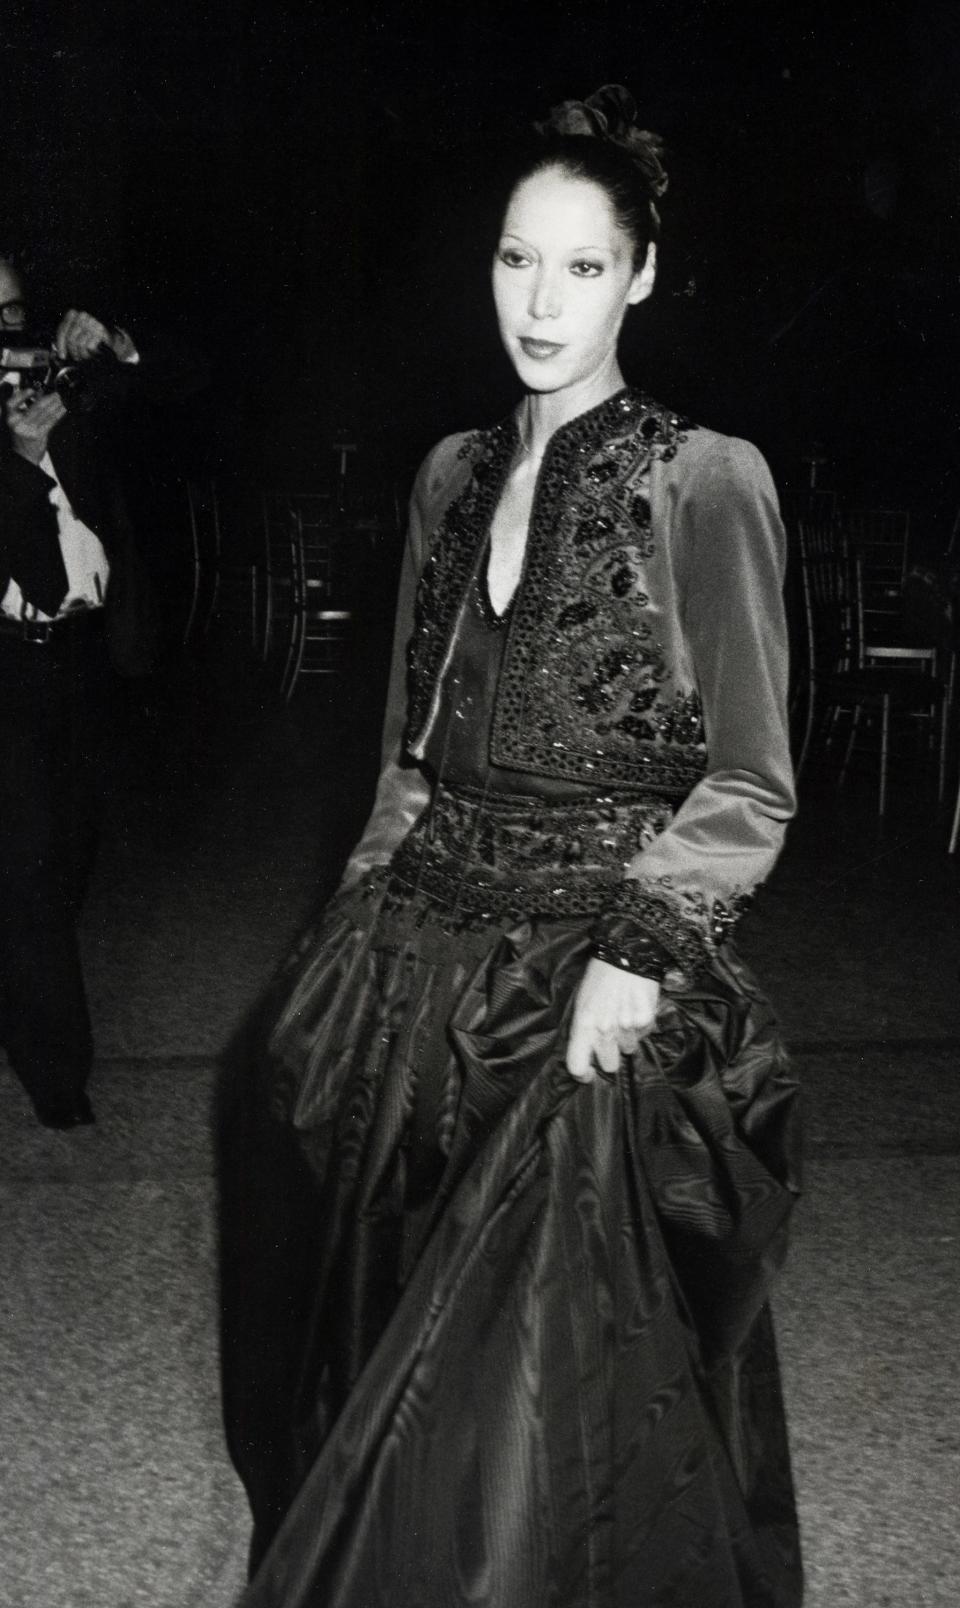 Marina Schiano in Yves Saint Laurent at the opening of The Glory of Russian Costume exhibition at the Met, 1976.